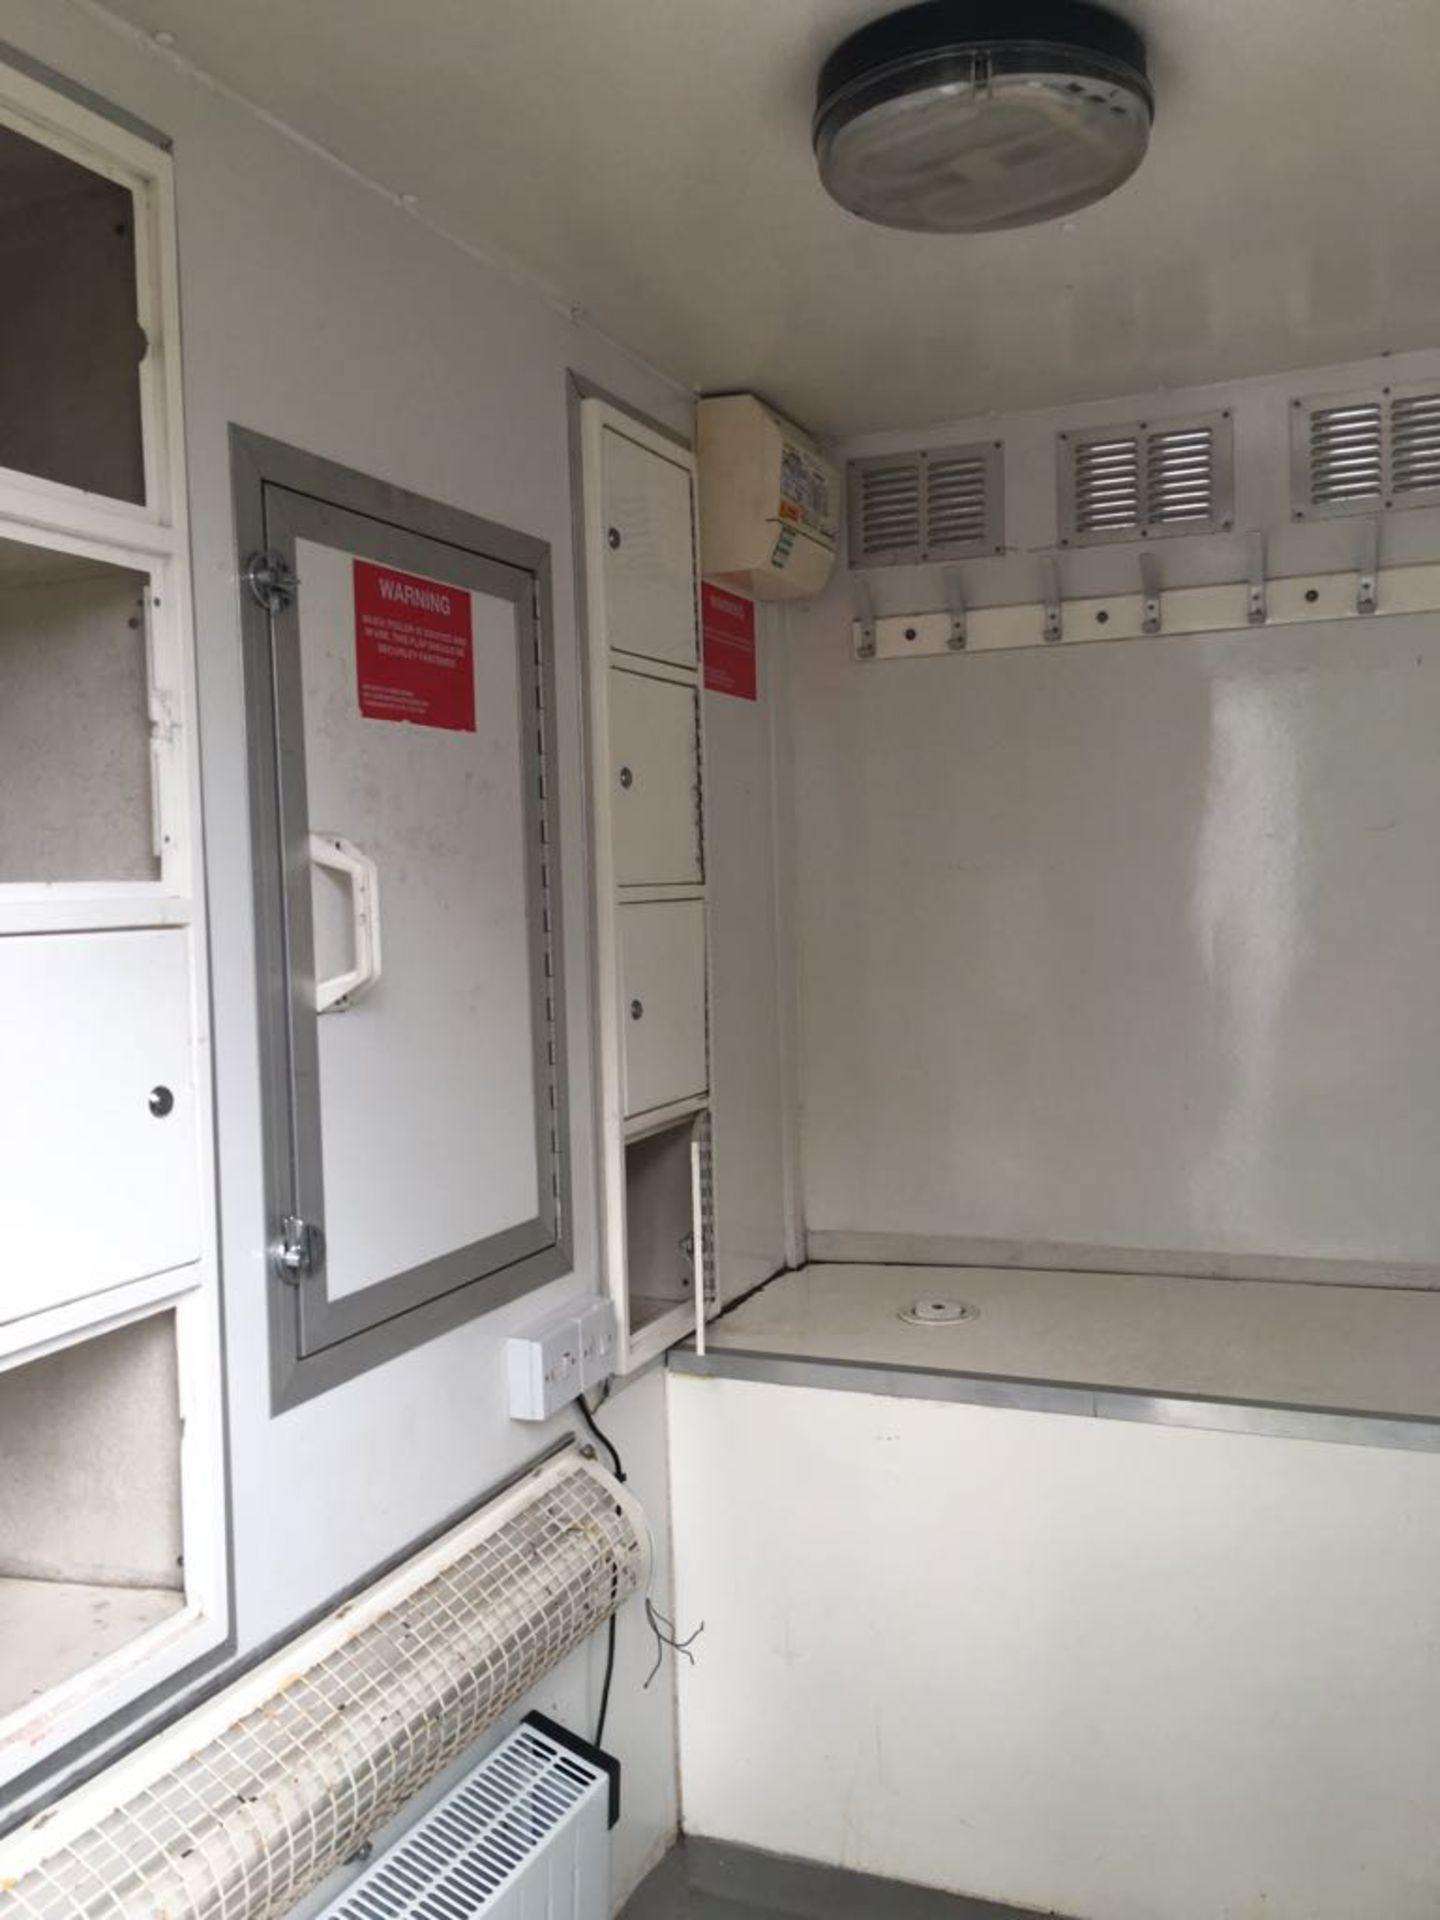 MOBILE TRAILER AMS TWIN SHOWER DECONTAMINATION UNIT AND CHANGING ROOMS - Image 22 of 27